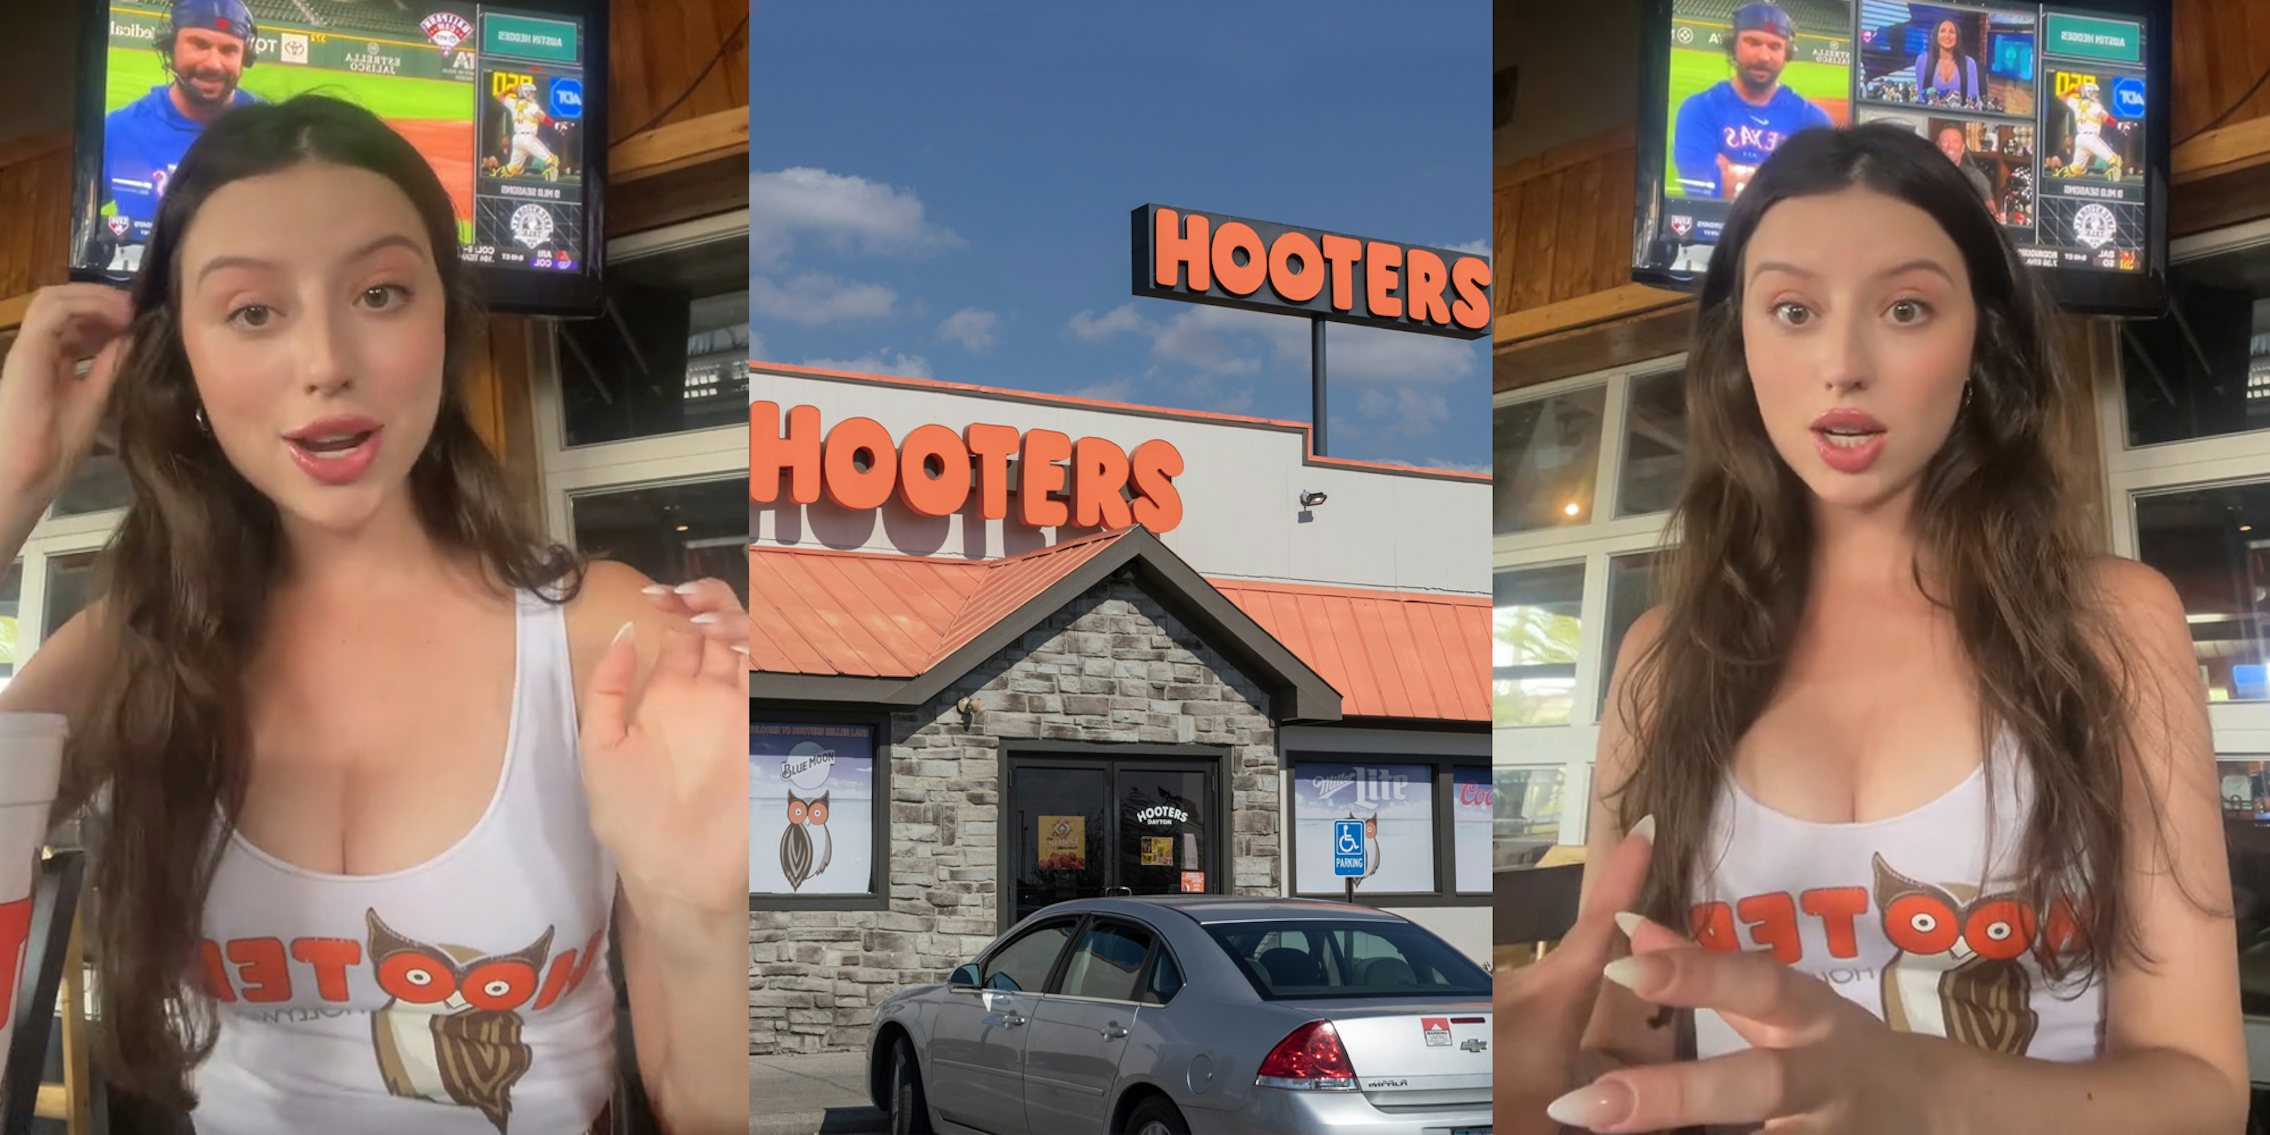 Hooter's worker speaking (l) Hooter's building with signs (c) Hooter's worker speaking (r)